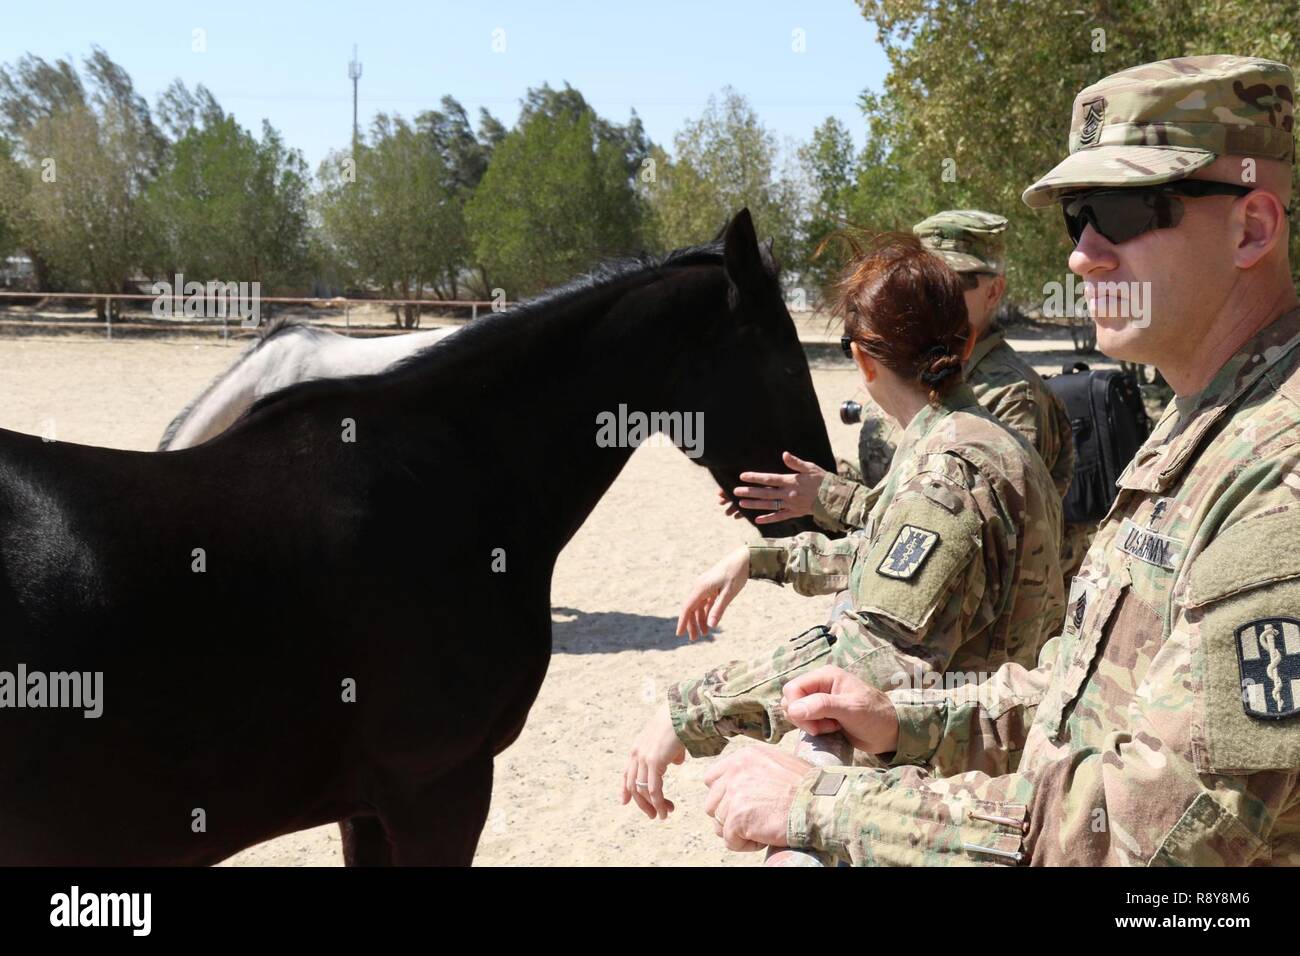 Command Sgt. Maj. Robert Nelson (right), the chief medical non-commissioned officer in charge, with the 31st Combat Support Hospital, along with Soldiers of the 195th Medical Detachment Veterinary Service Support, checks on the status of a pregnant horse, March 7, 2017, at the Kuwait Military of Defense. Their visit is part of the military to military project of sharing veterinarian services the United States has with its host nation of Kuwait. Stock Photo